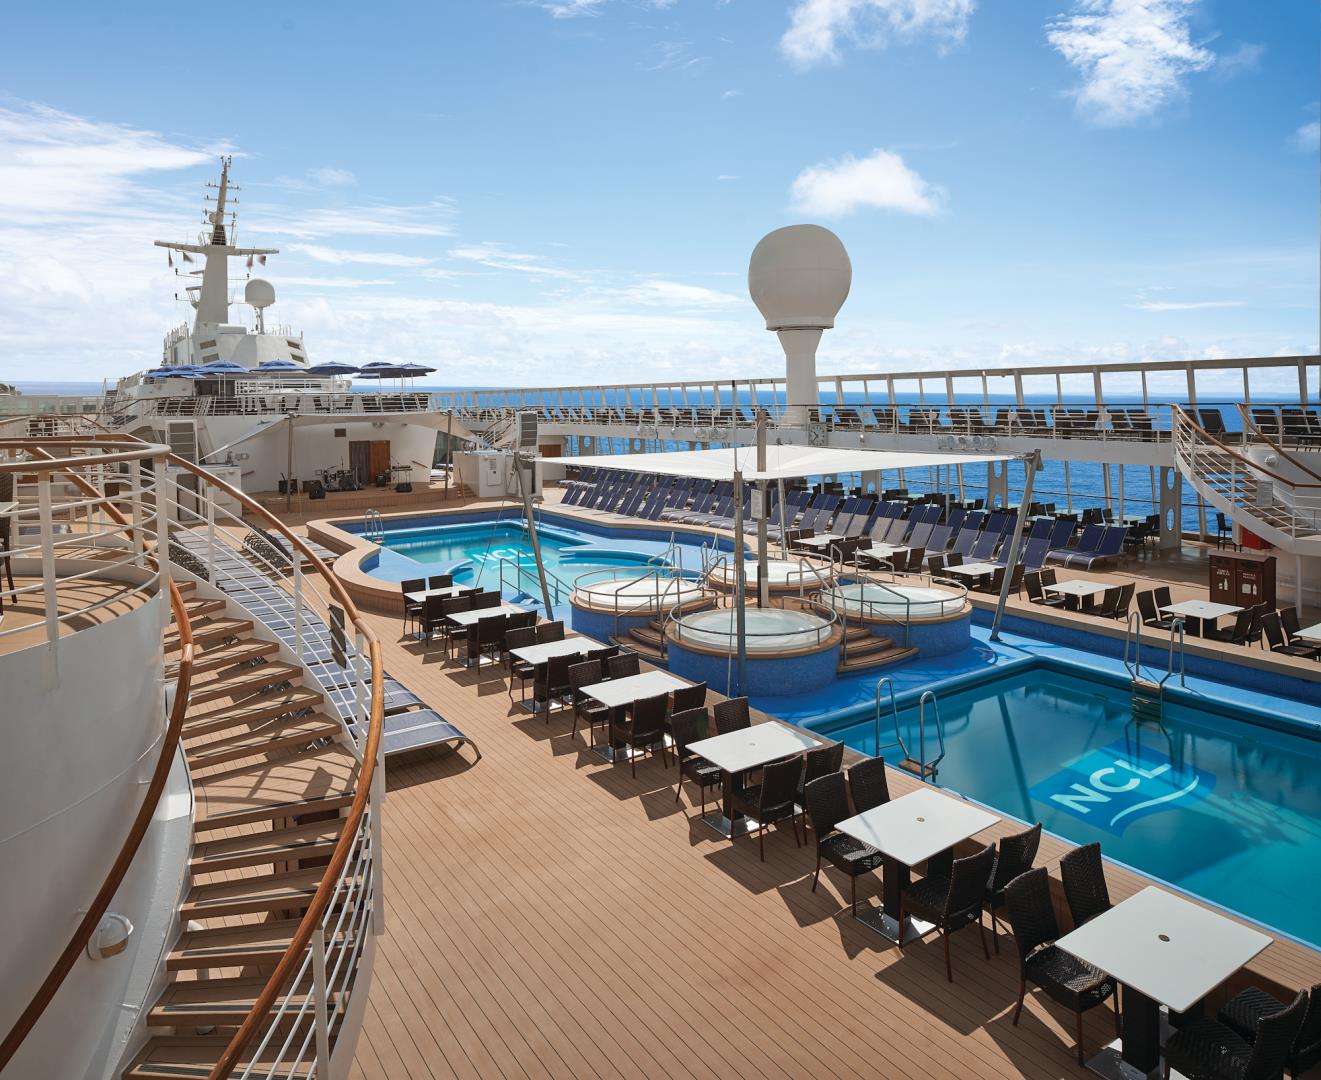 9-day Cruise to Europe: France, Spain, Portugal & Belgium from Lisbon, Portugal on Norwegian Sky